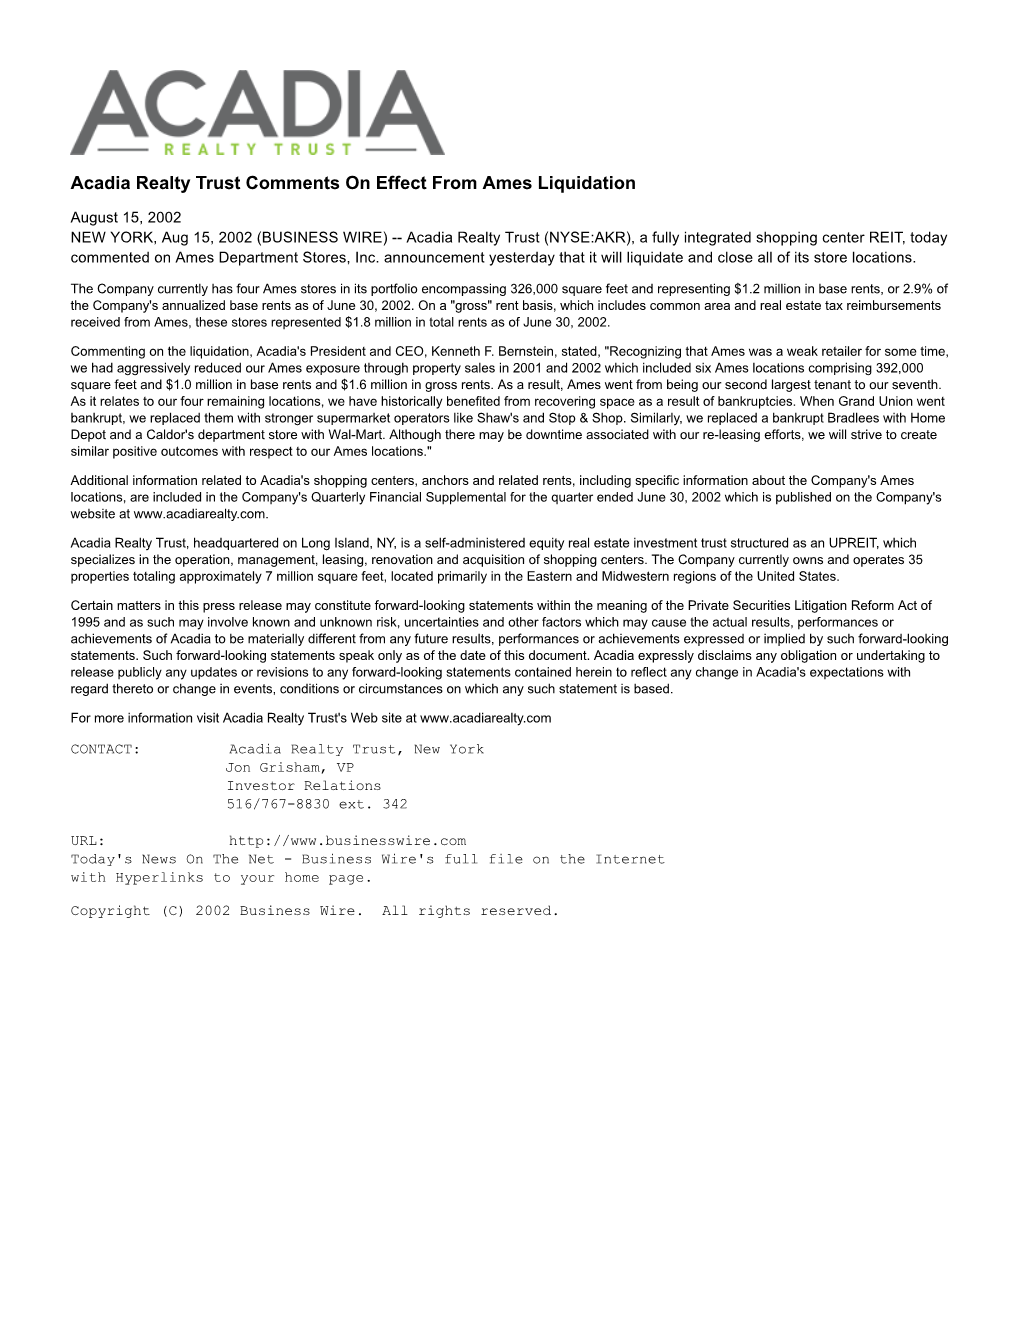 Acadia Realty Trust Comments on Effect from Ames Liquidation